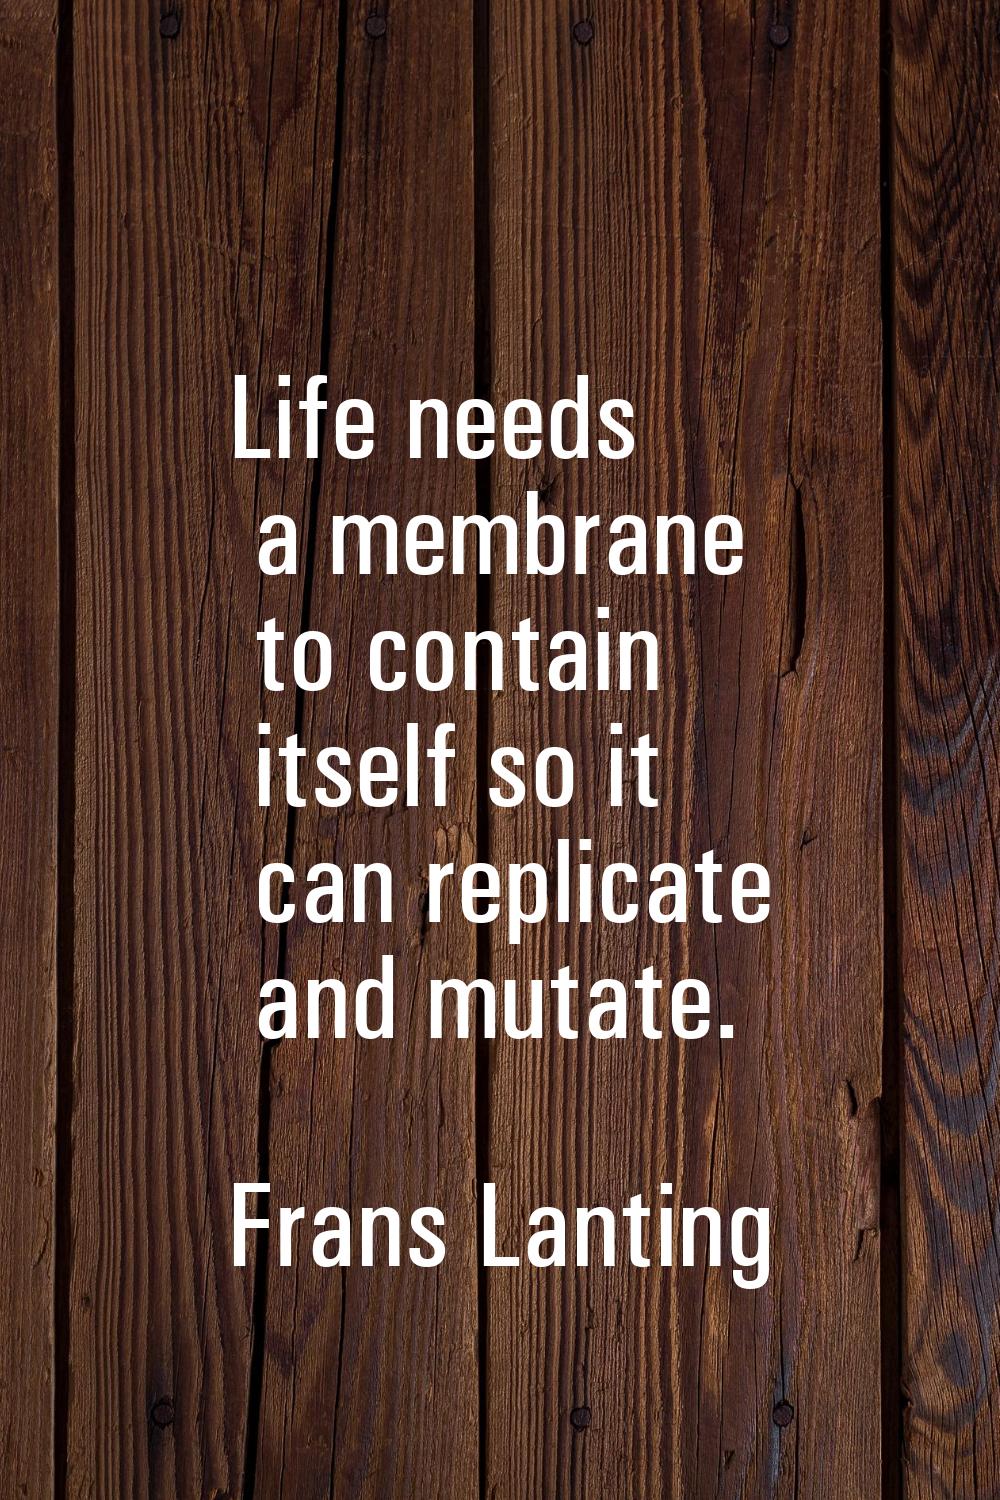 Life needs a membrane to contain itself so it can replicate and mutate.